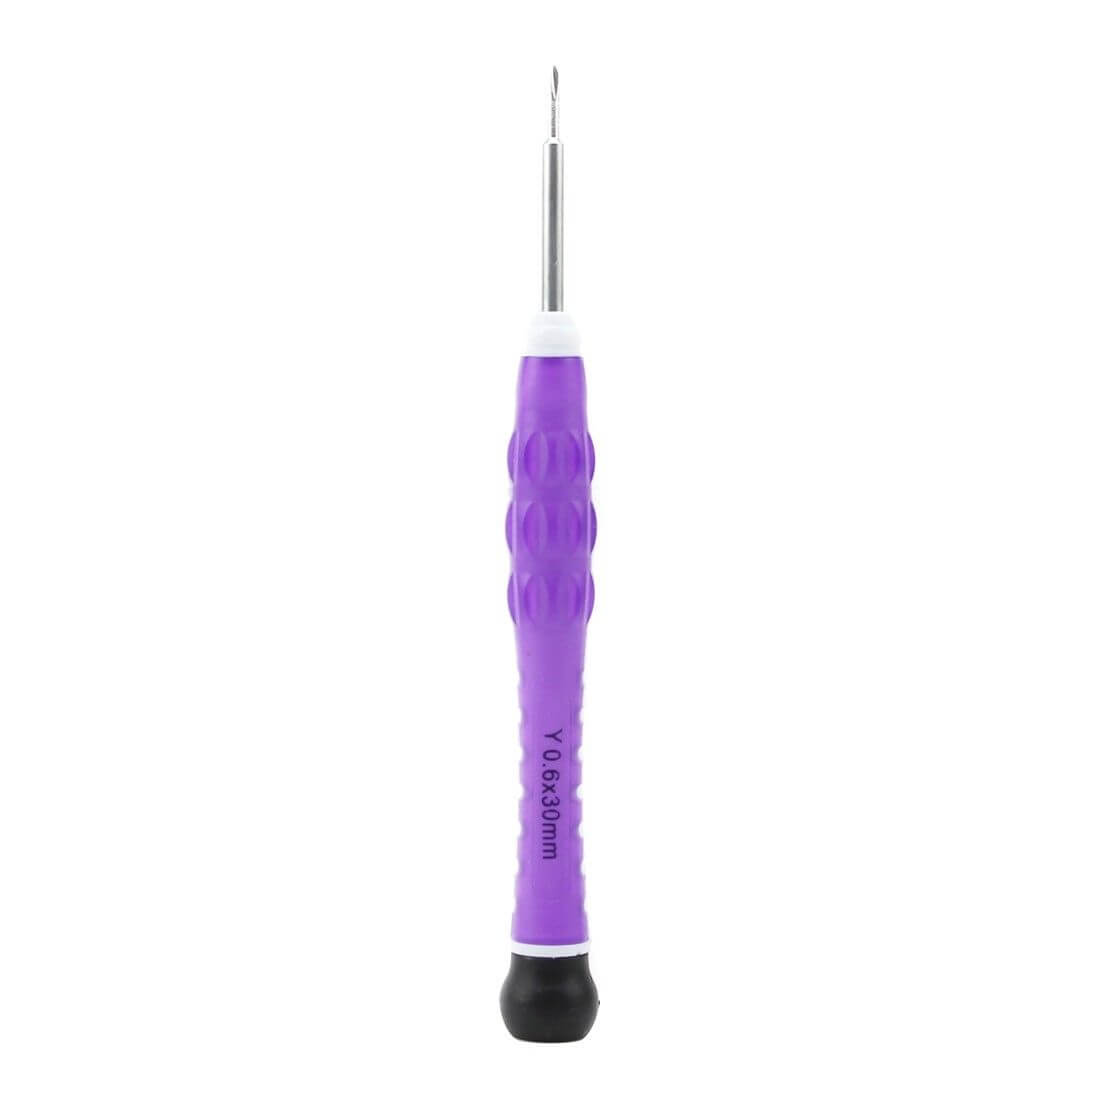 Tri-point 0.6 x 30mm Repair Screwdriver for iPhone 7 & 7 Plus & Apple Watch